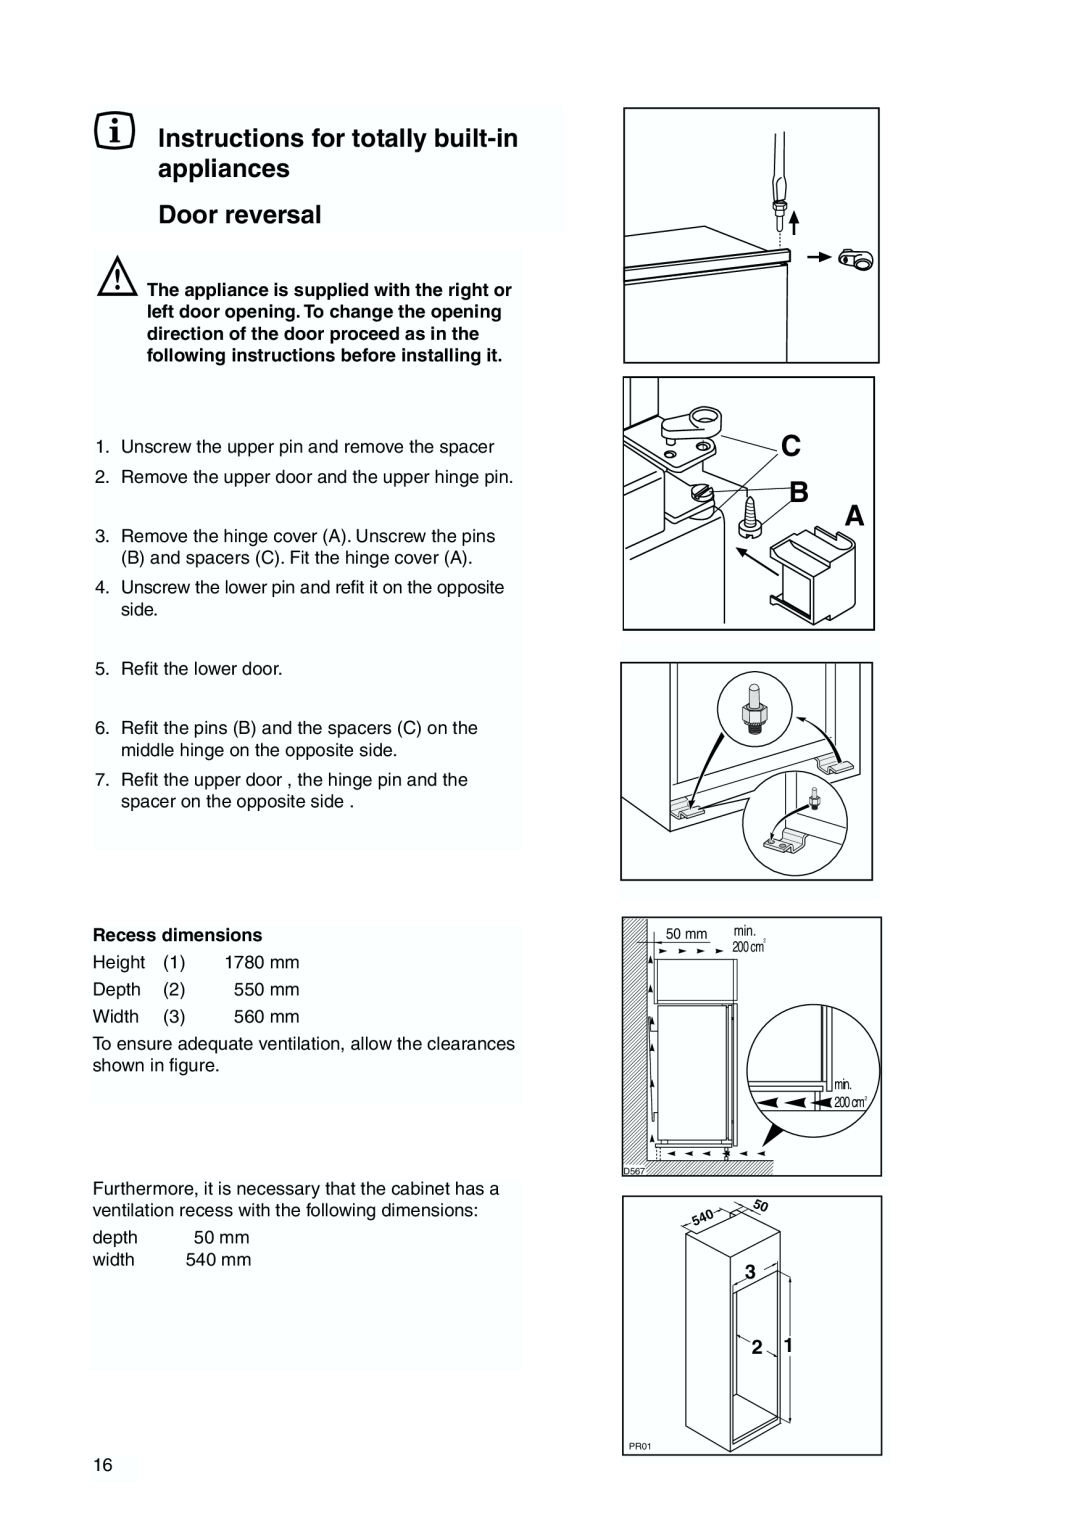 Zanussi ZBB6286 manual Instructions for totally built-in appliances Door reversal, Recess dimensions 